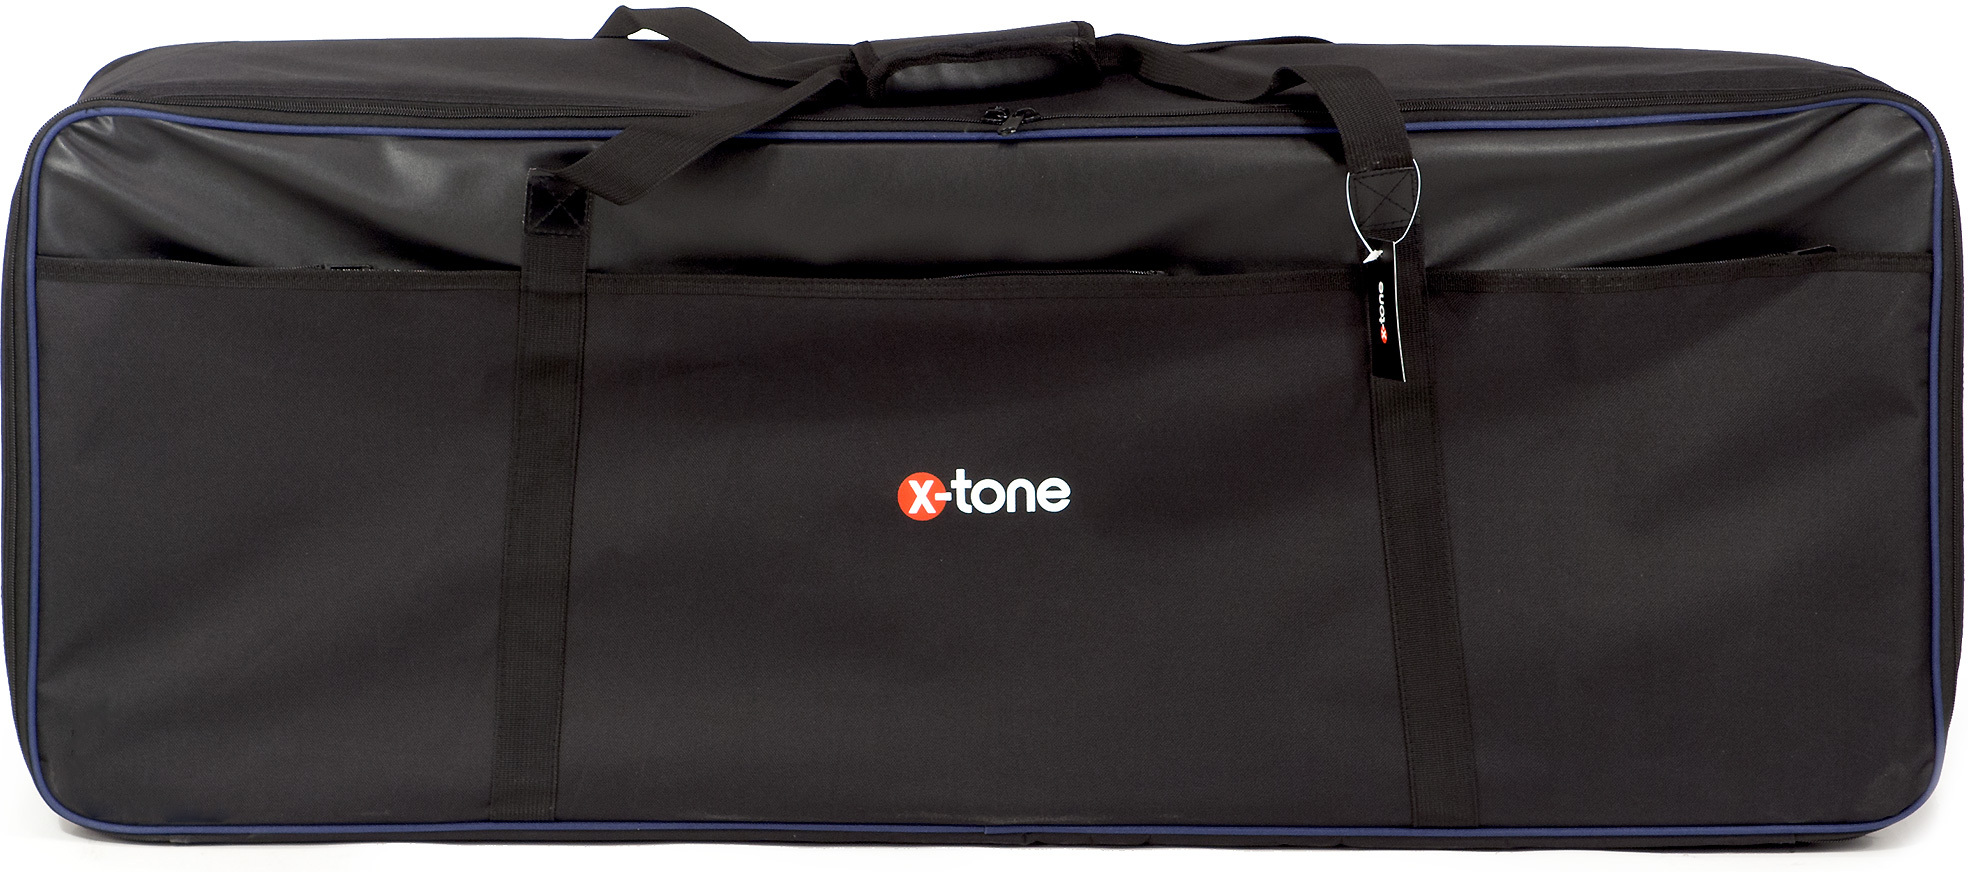 X-tone 2103 Pour Clavier 61 Notes En 25 Mm Black - Gigbag for Keyboard - Main picture